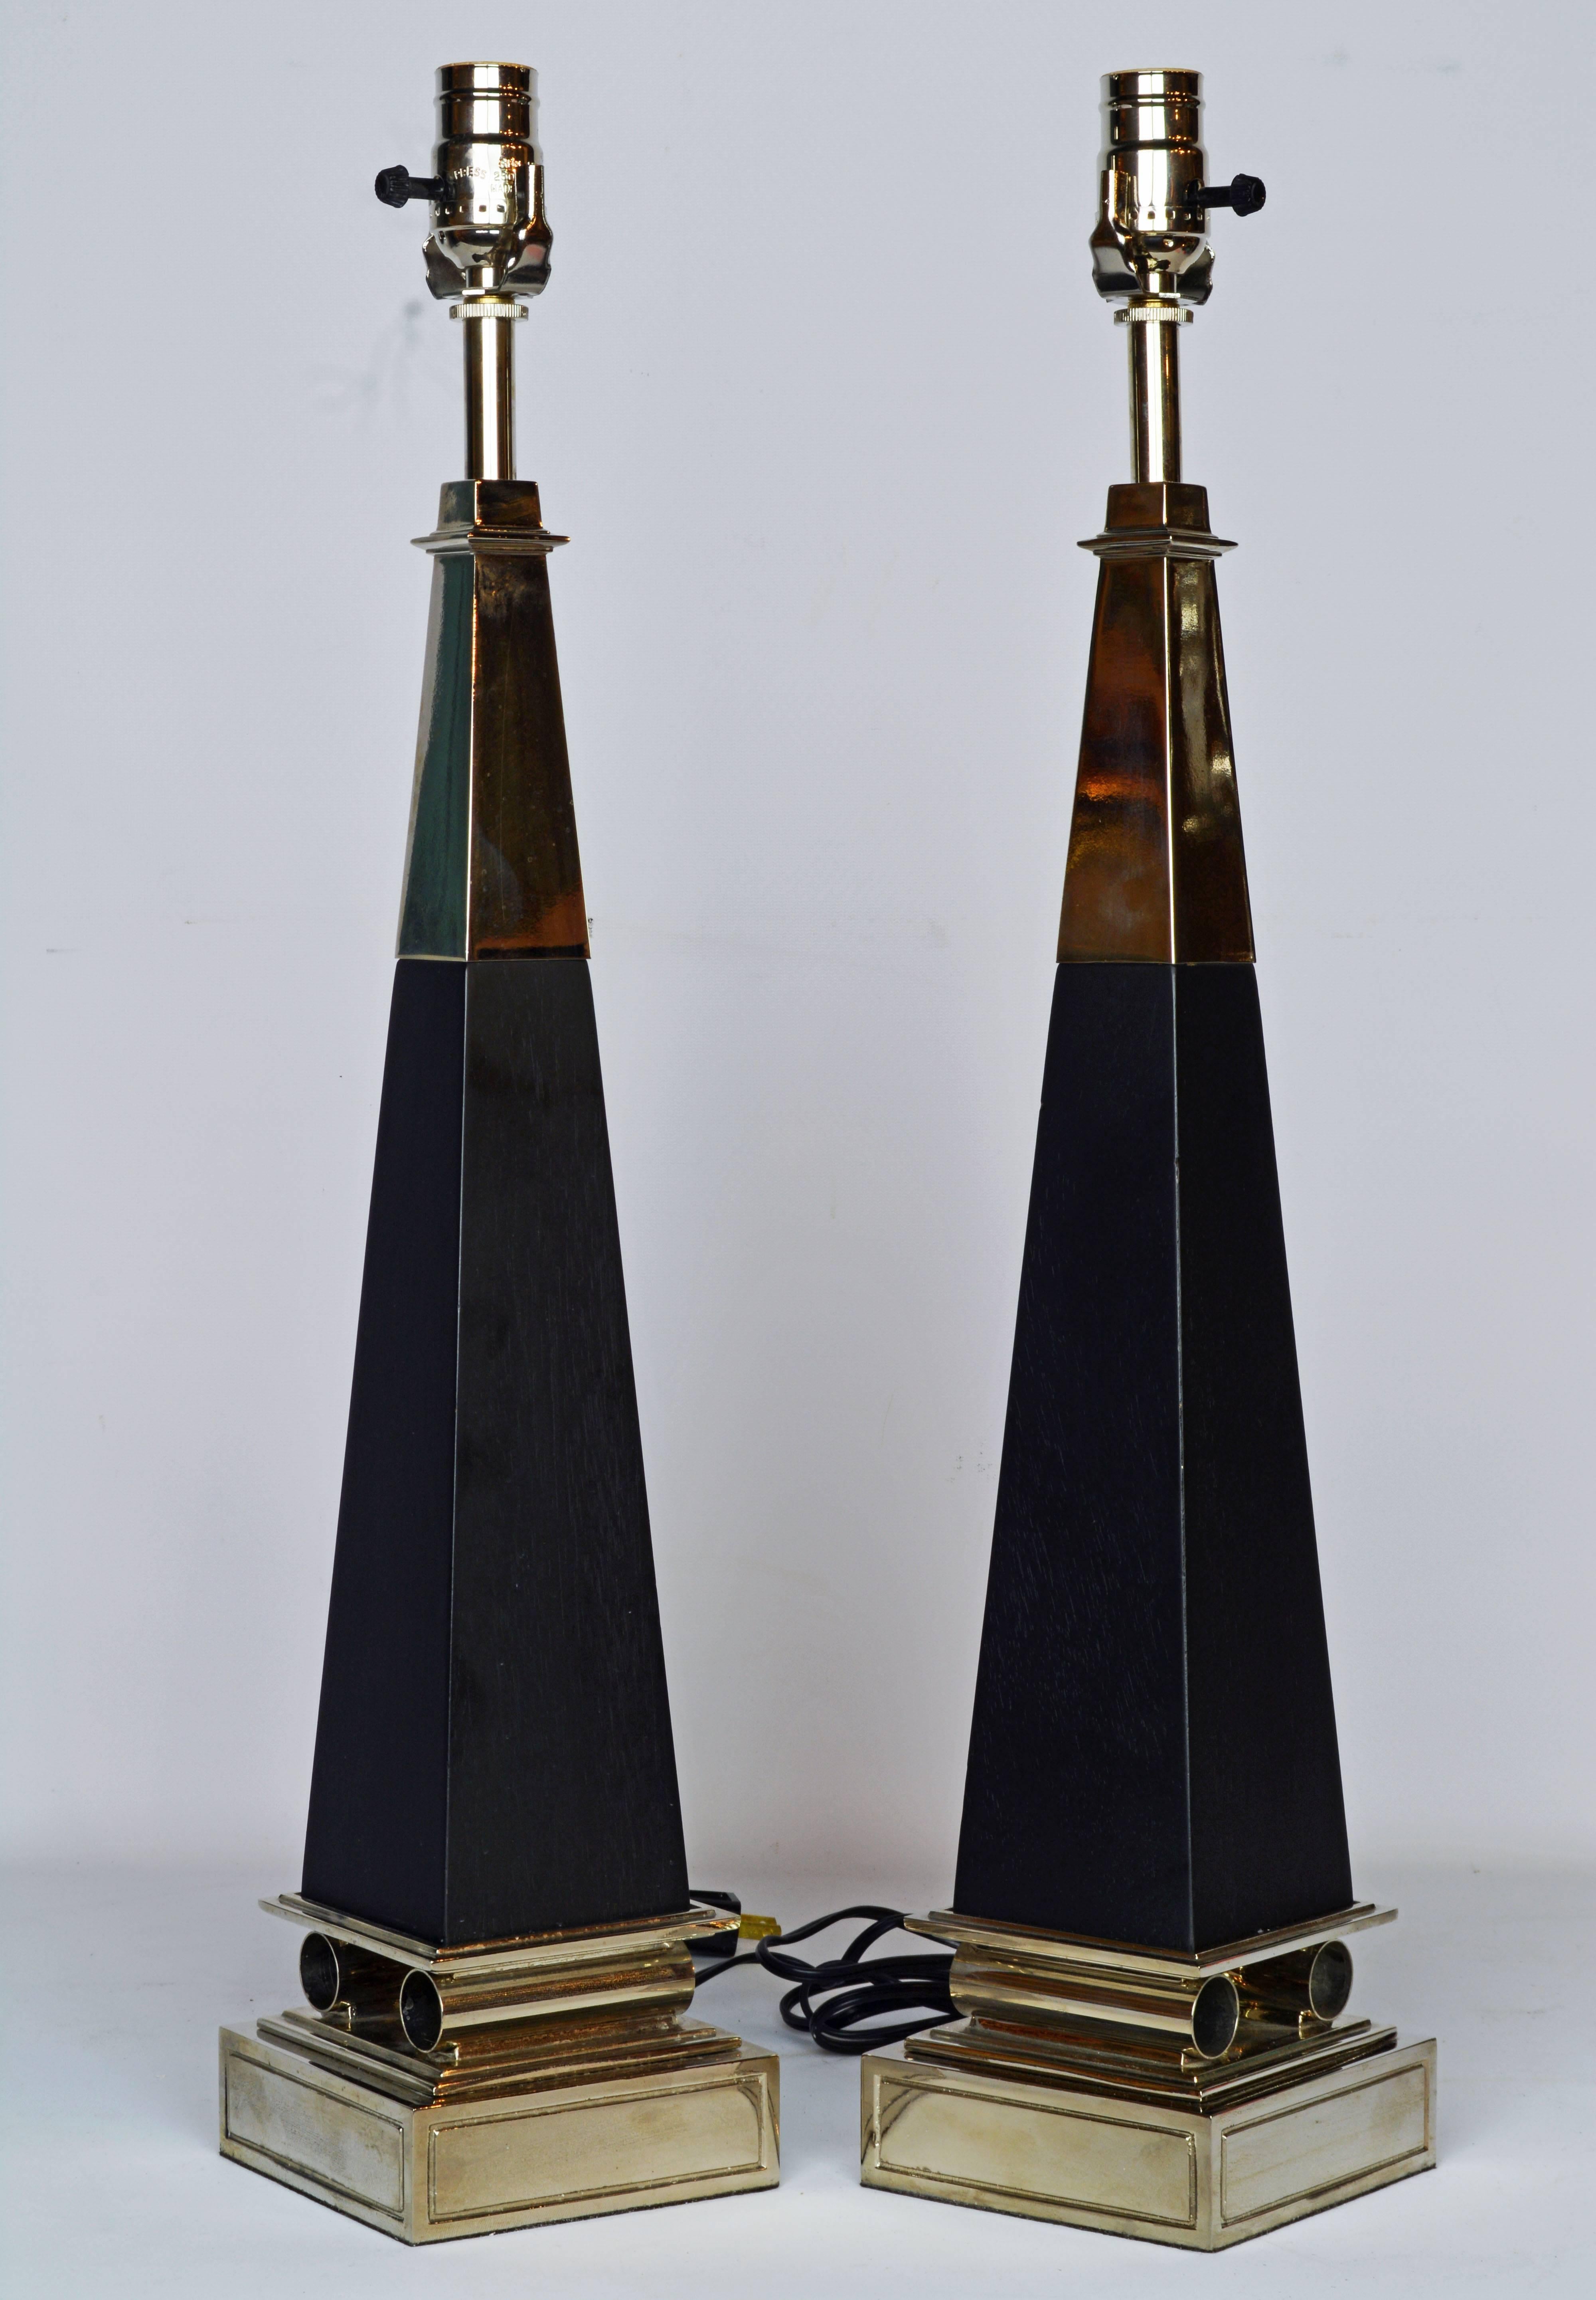 These Mid-Century Modern table lamps in the shape of obelisks represent an iconic Tommi Parzinger design. They feature chrome top sections above ebonized wood columns resting on a square chrome base intersected by classical inspired chrome cylinders.